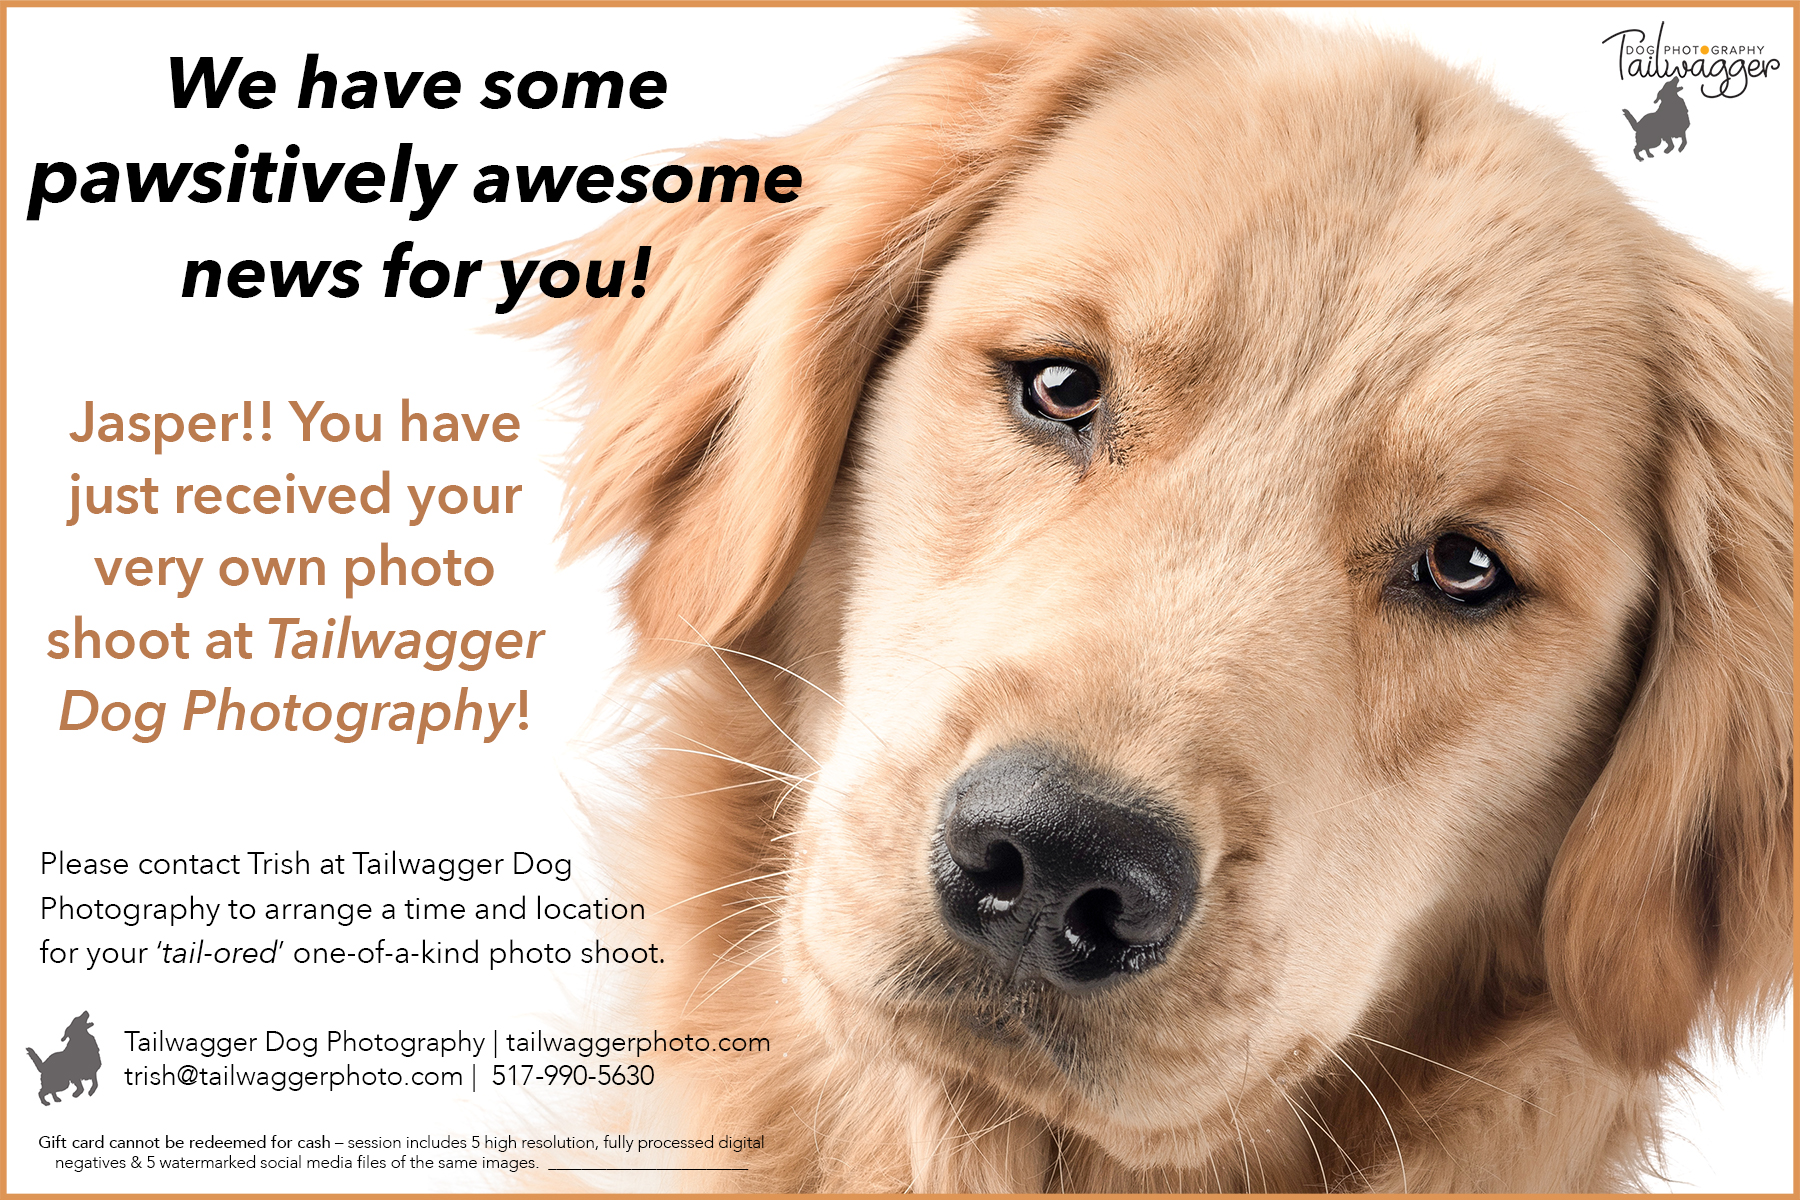 Promo of Tailwagger Pet Photography for a grift card.